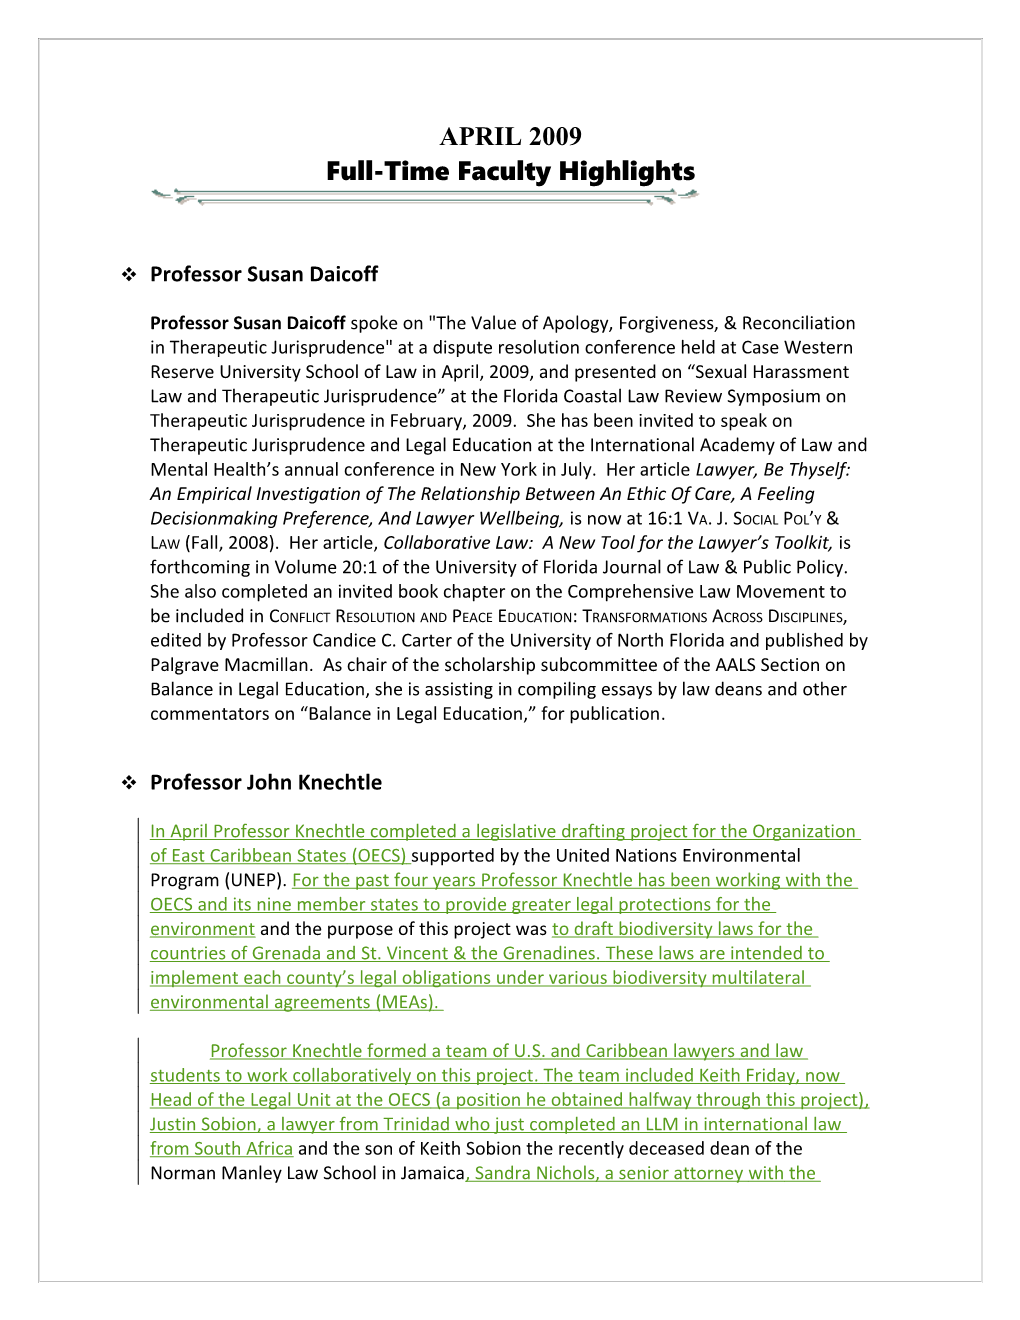 Full-Time Faculty Highlights